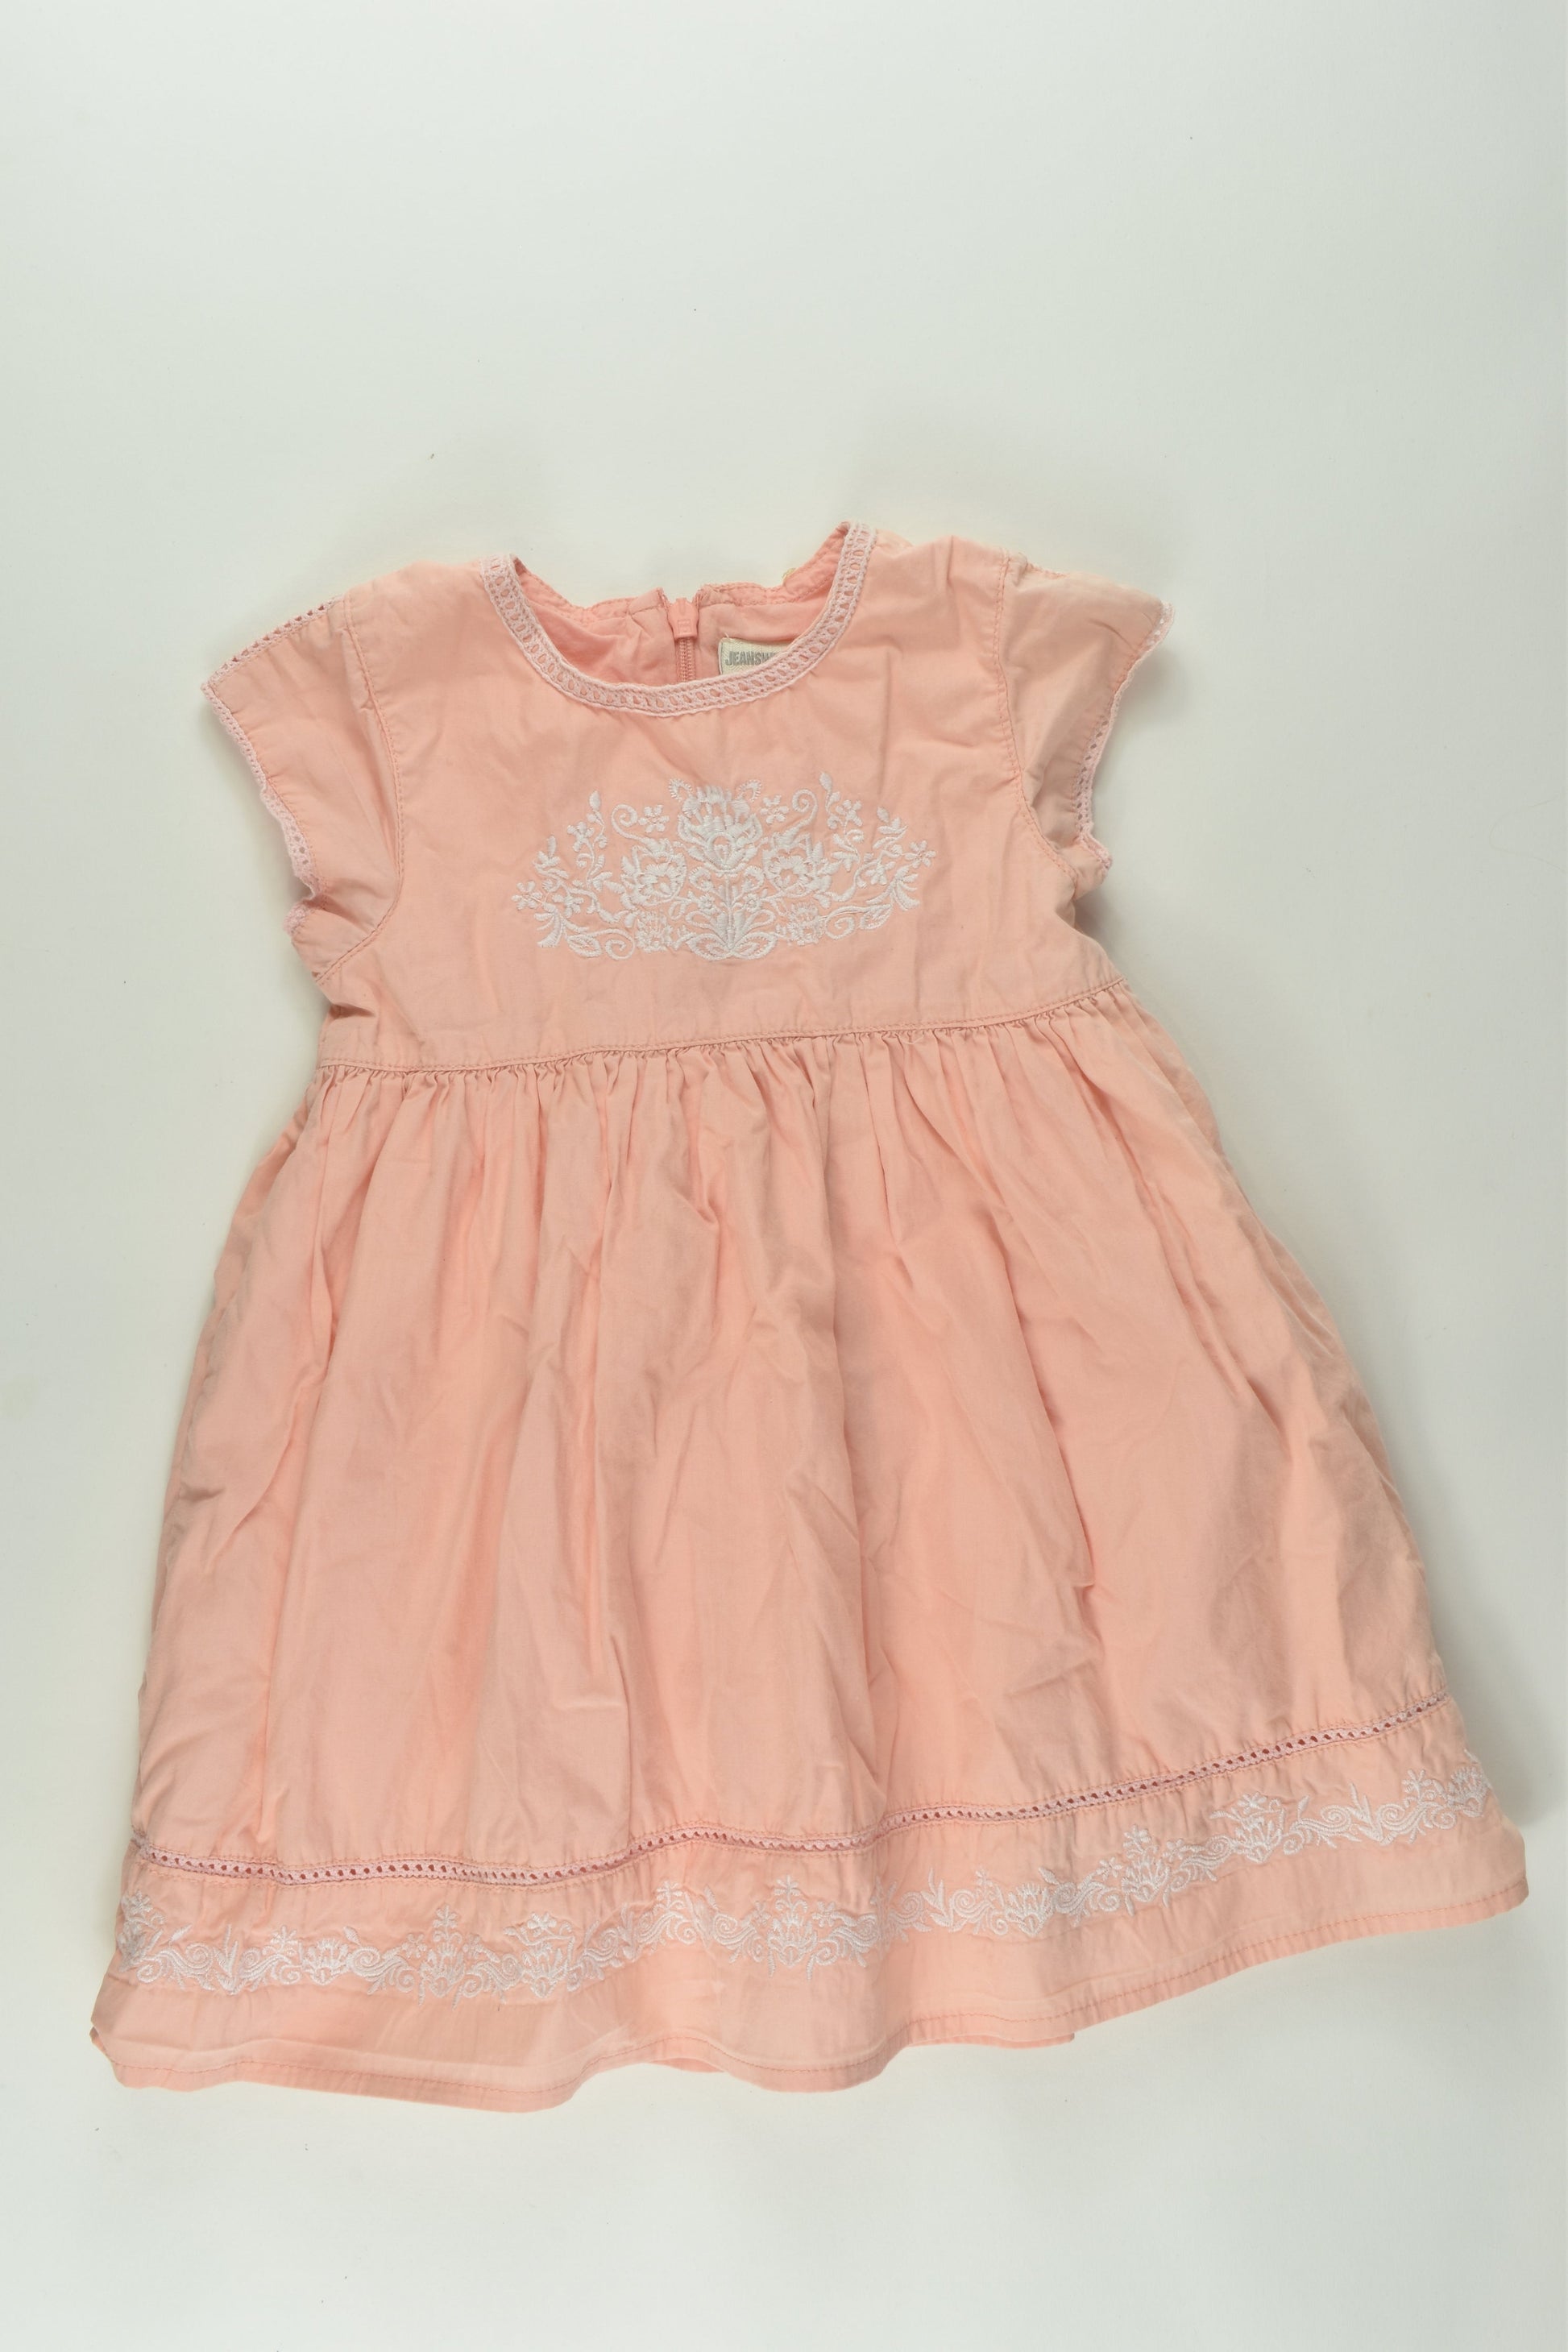 Jeanswest Jnr Size 2 Embroidery Dress